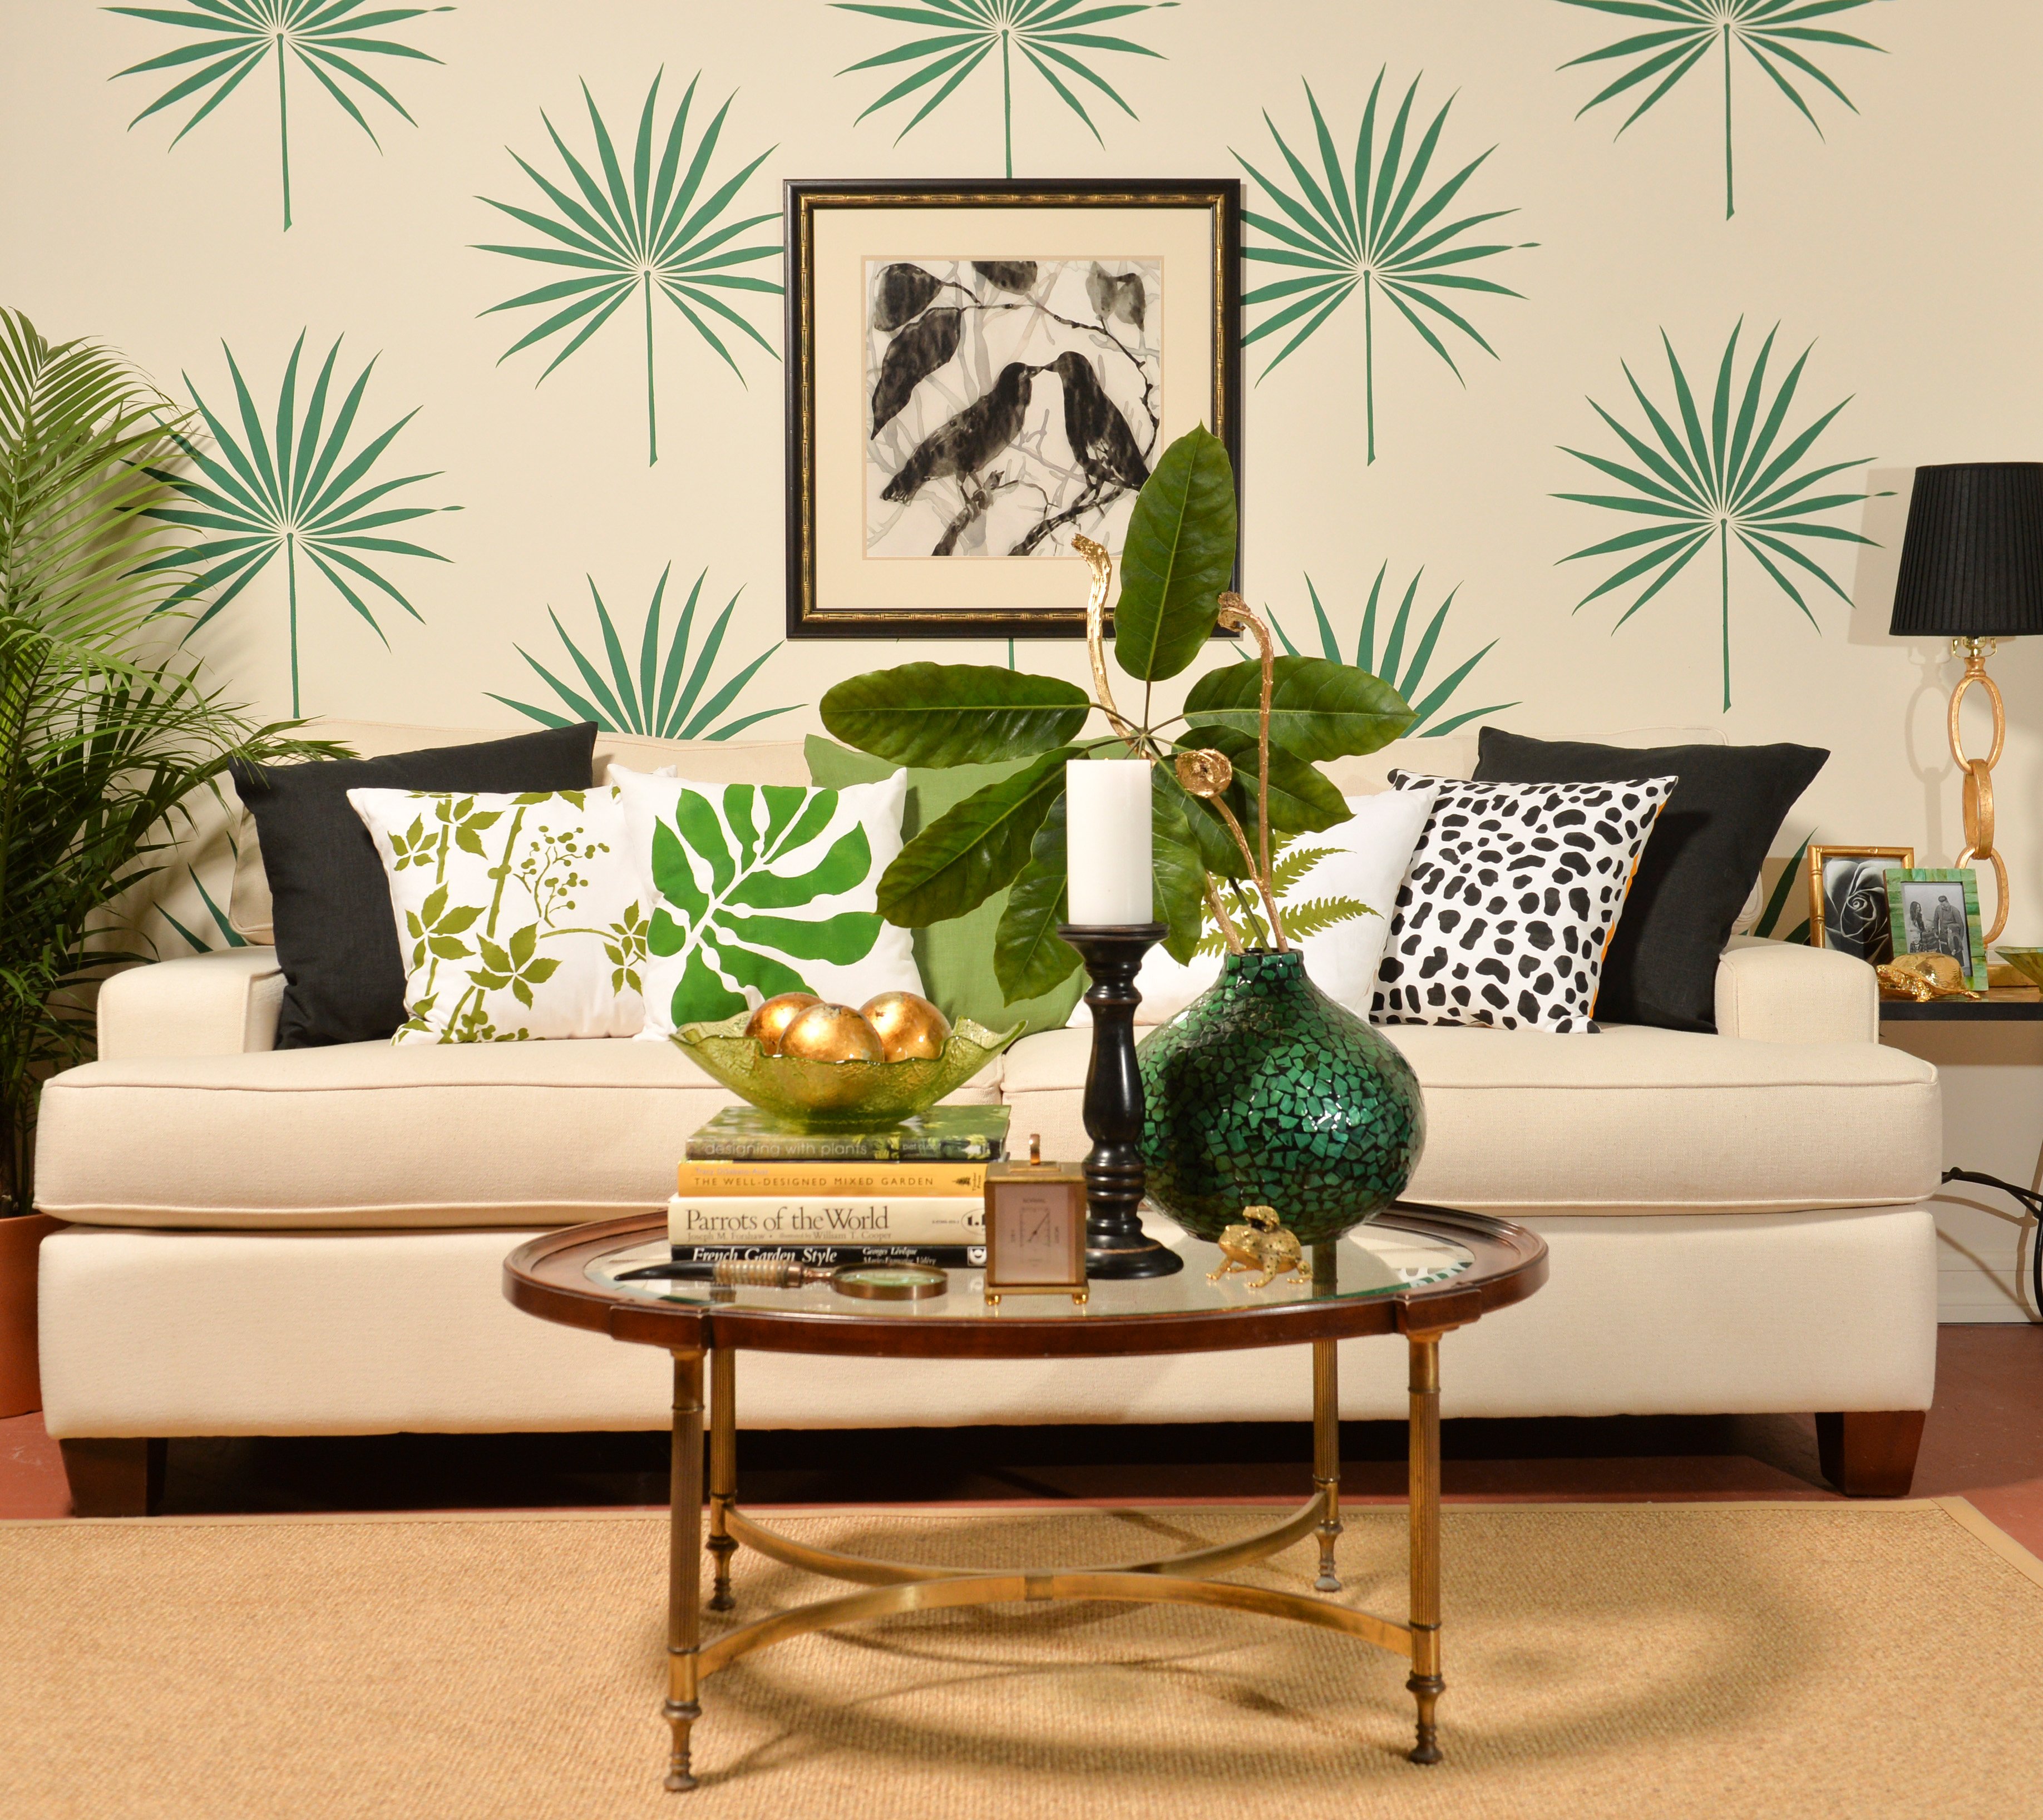 A DIY stenciled living room accent wall using the Palmetto Leaf Wall Art Stencil for the tropical home decor trend. http://www.cuttingedgestencils.com/palm-leaf-stencil-palmetto-wall-decor.html